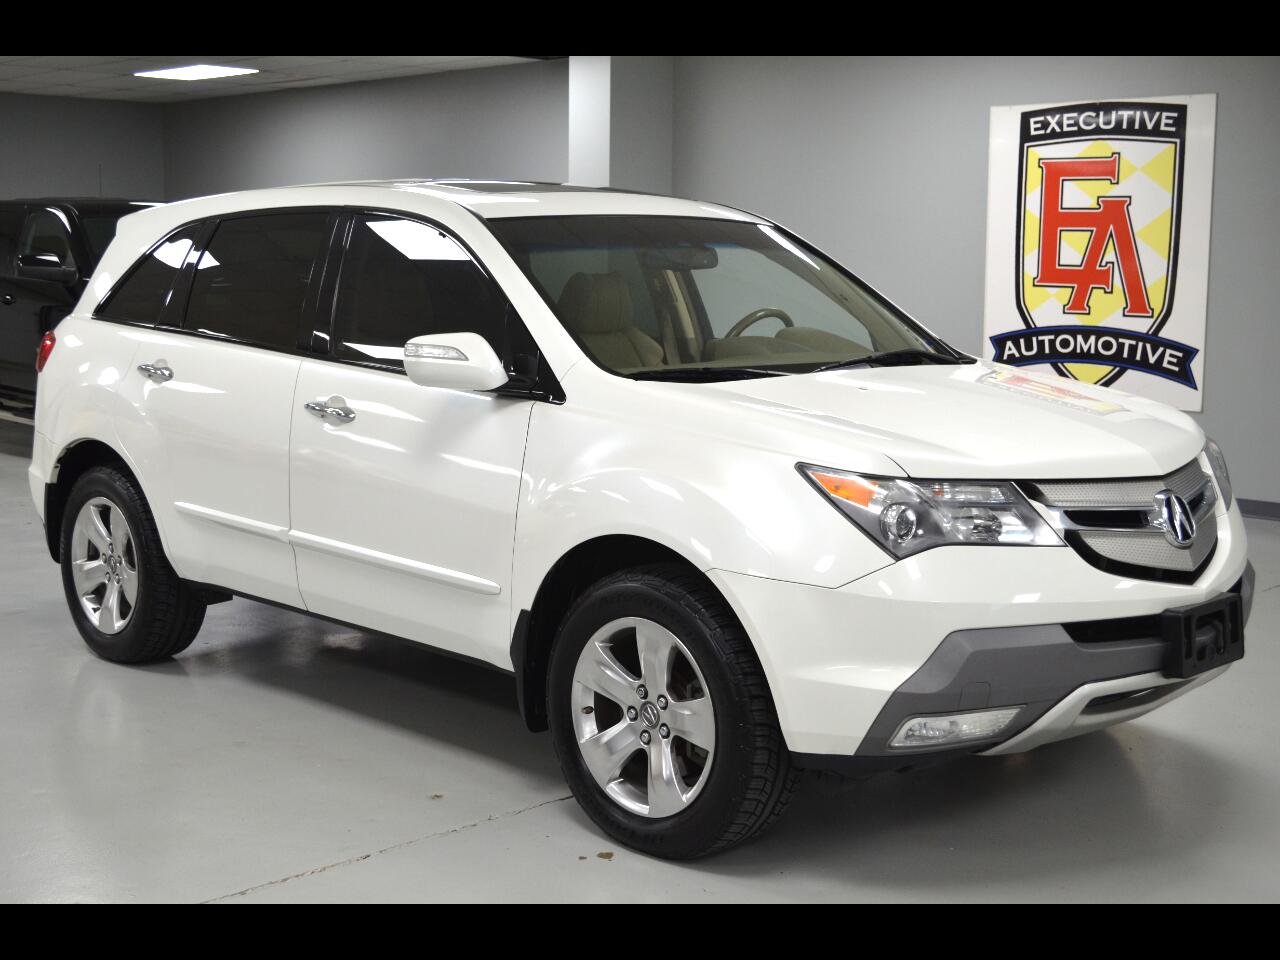 Used 2009 Acura MDX Sold in Lees Summit MO 64081 Executive Automotive